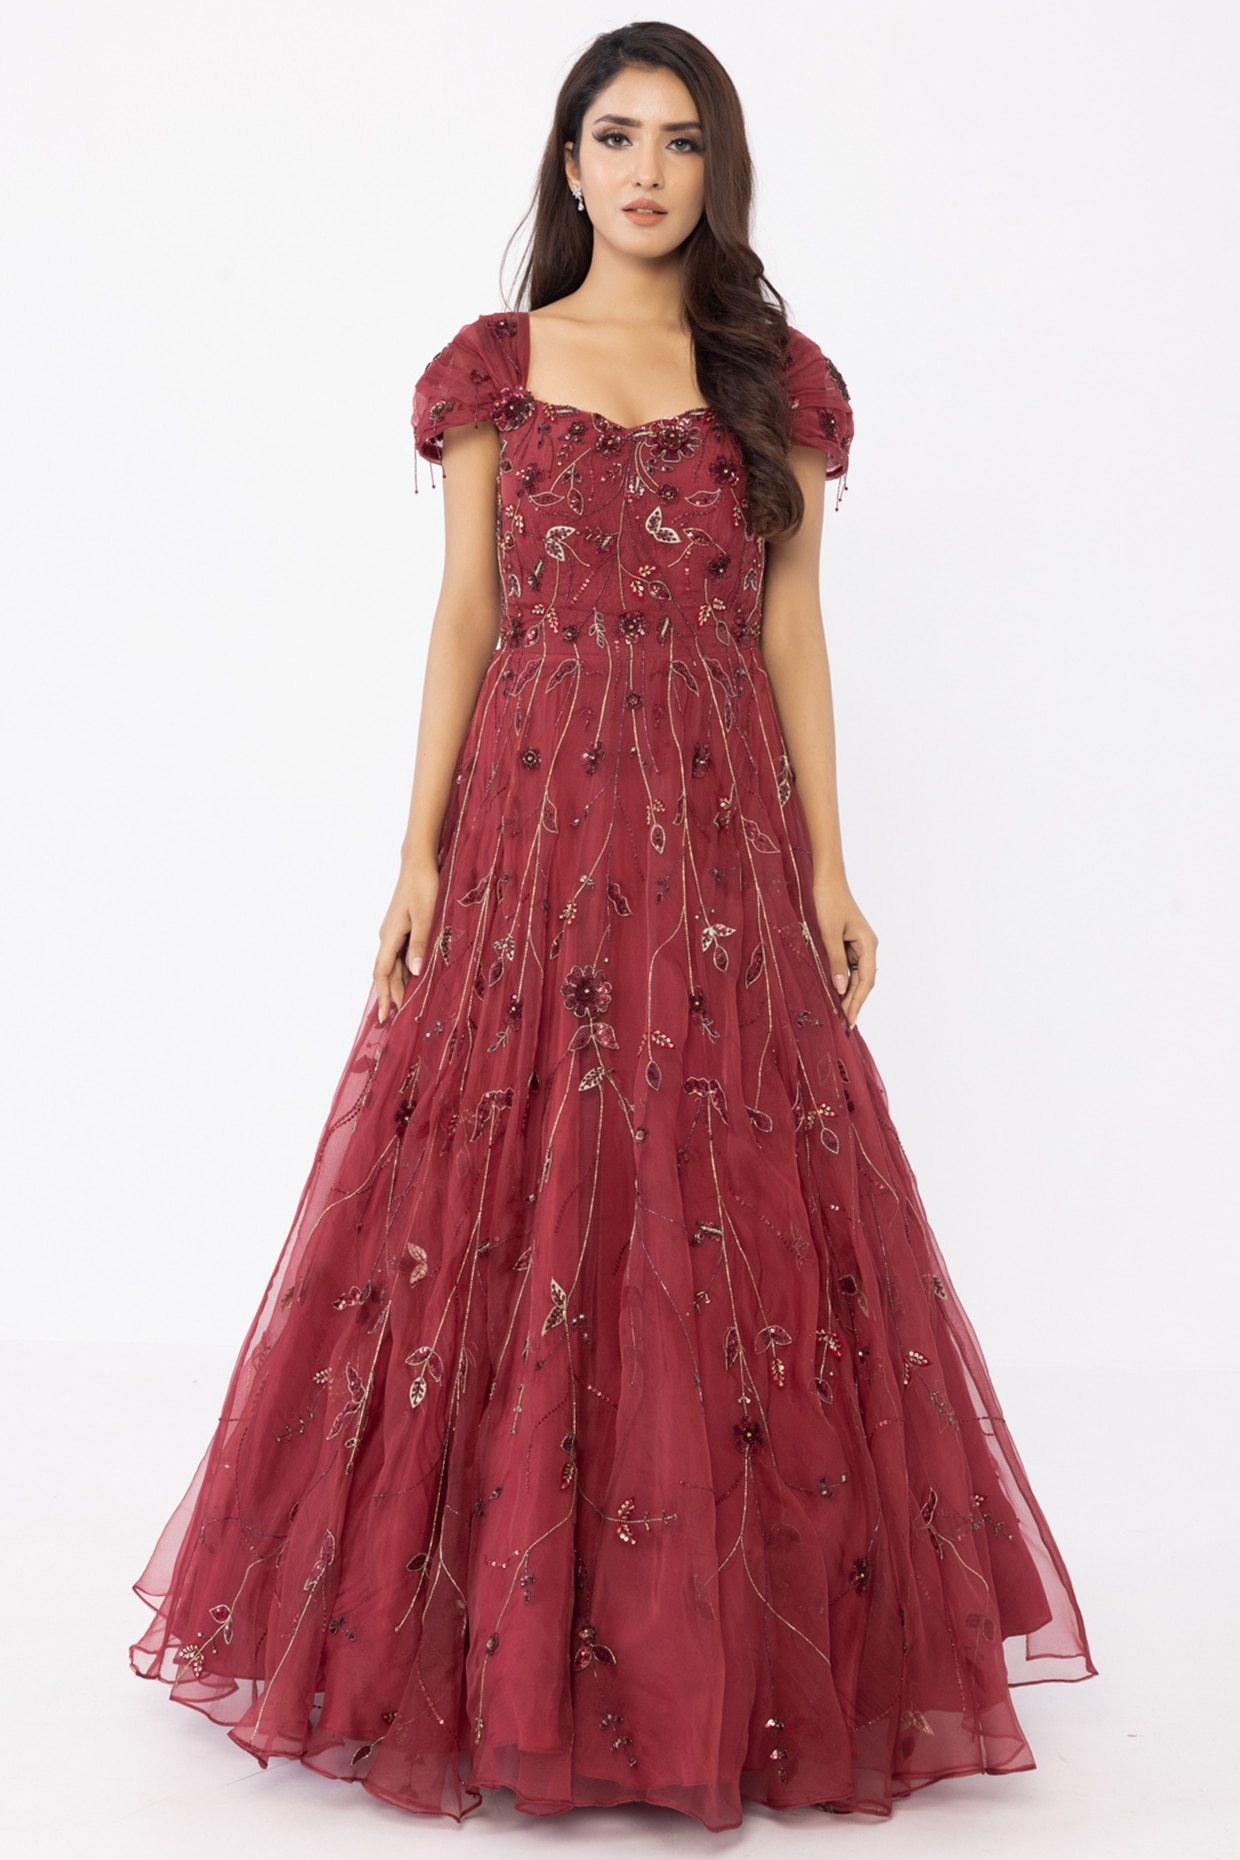 Wine-Colored Mother of the Bride Dress